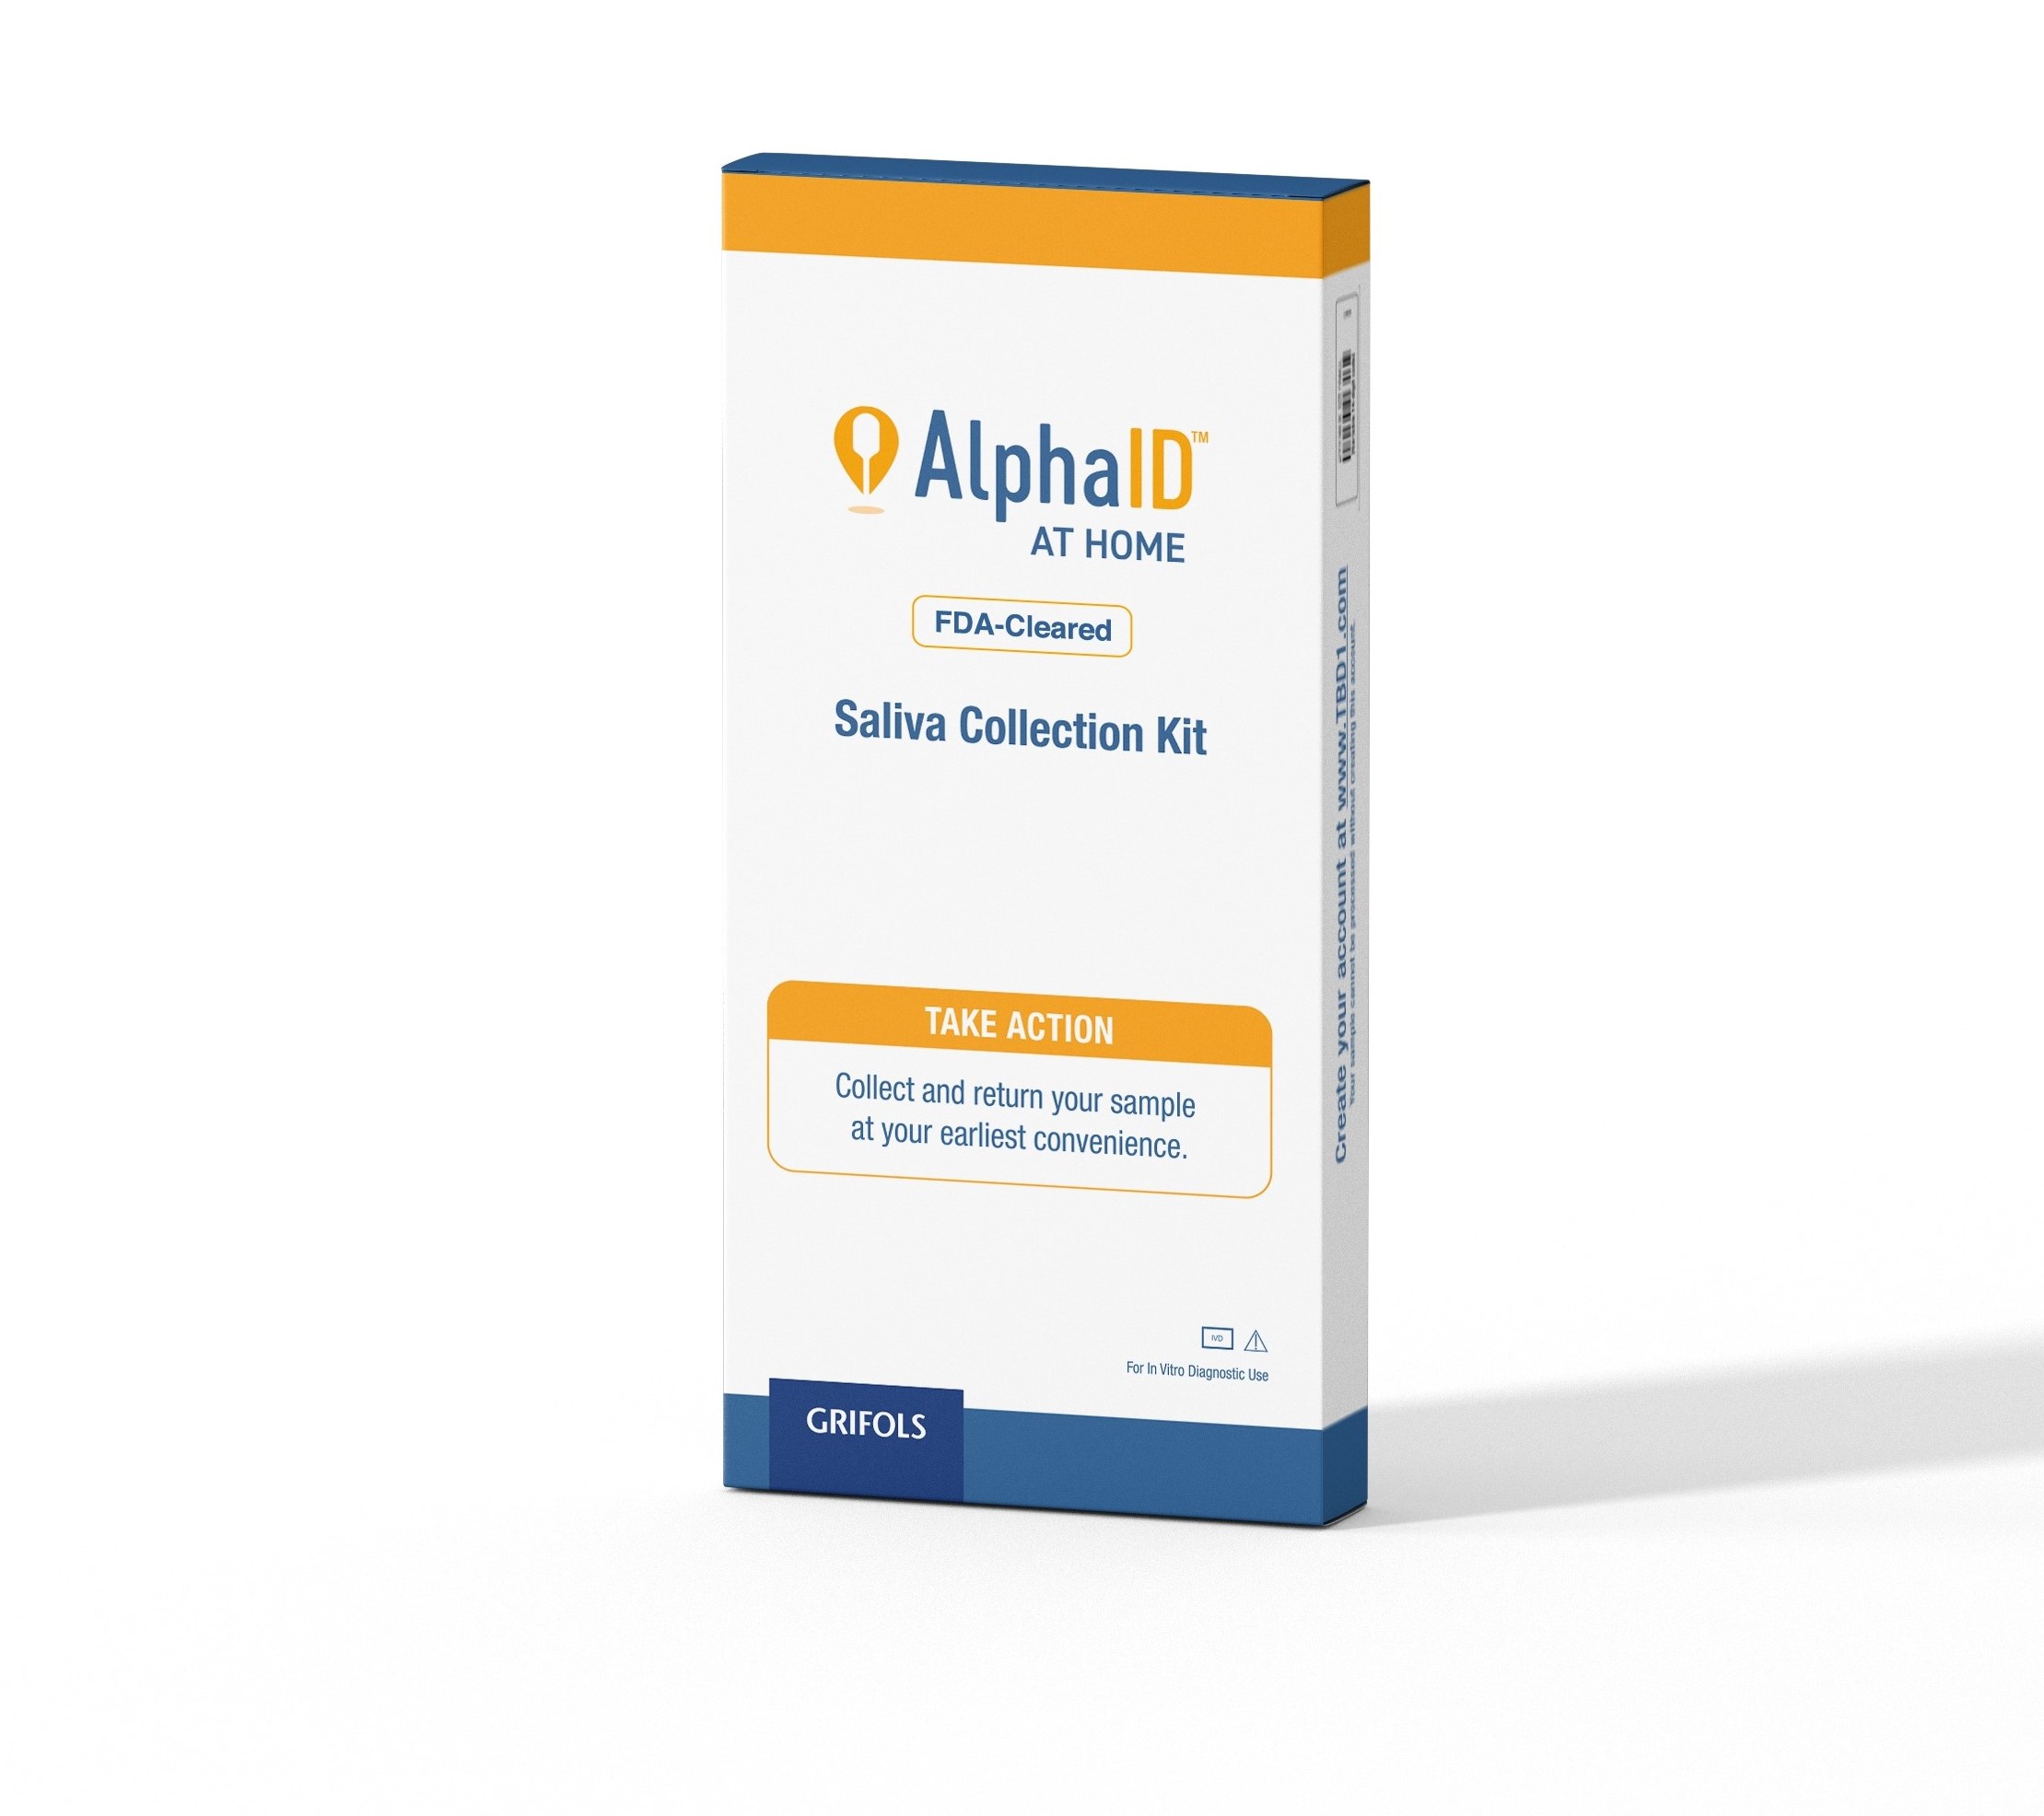 AlphaID Saliva Collection Kit packaging